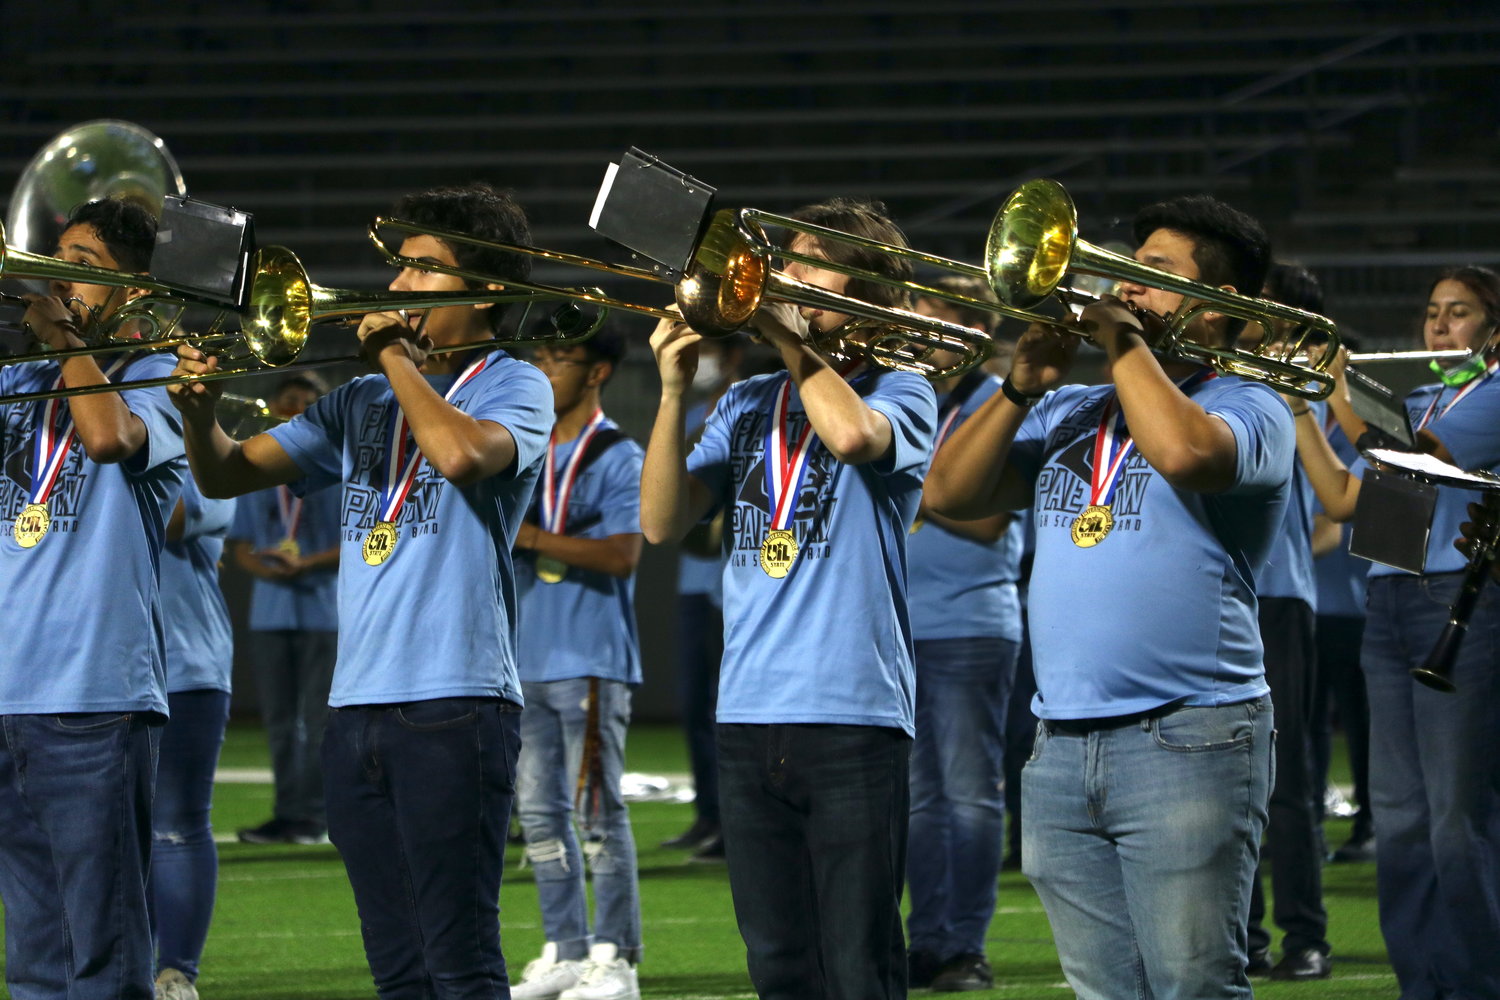 The Paetow band performs during Wednesday's Paetow State Championship celebration at Legacy Stadium